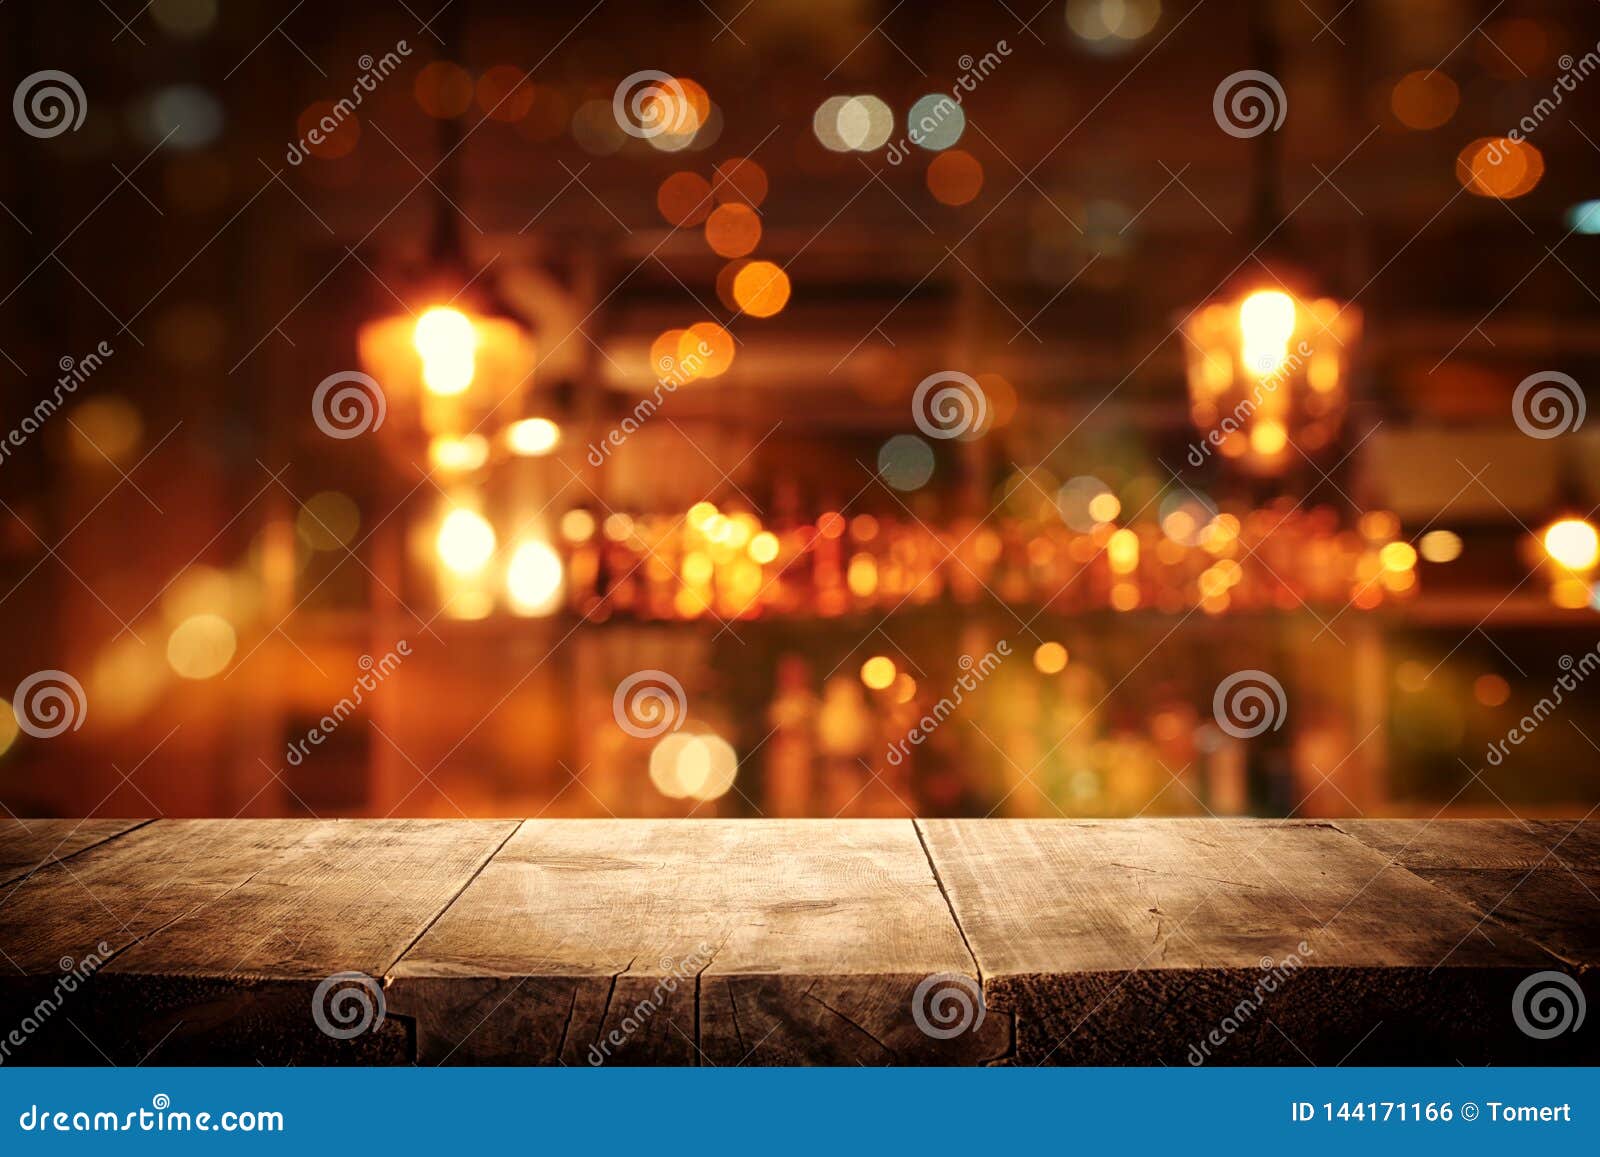 Image of Wooden Table in Front of Abstract Blurred Restaurant Lights ...